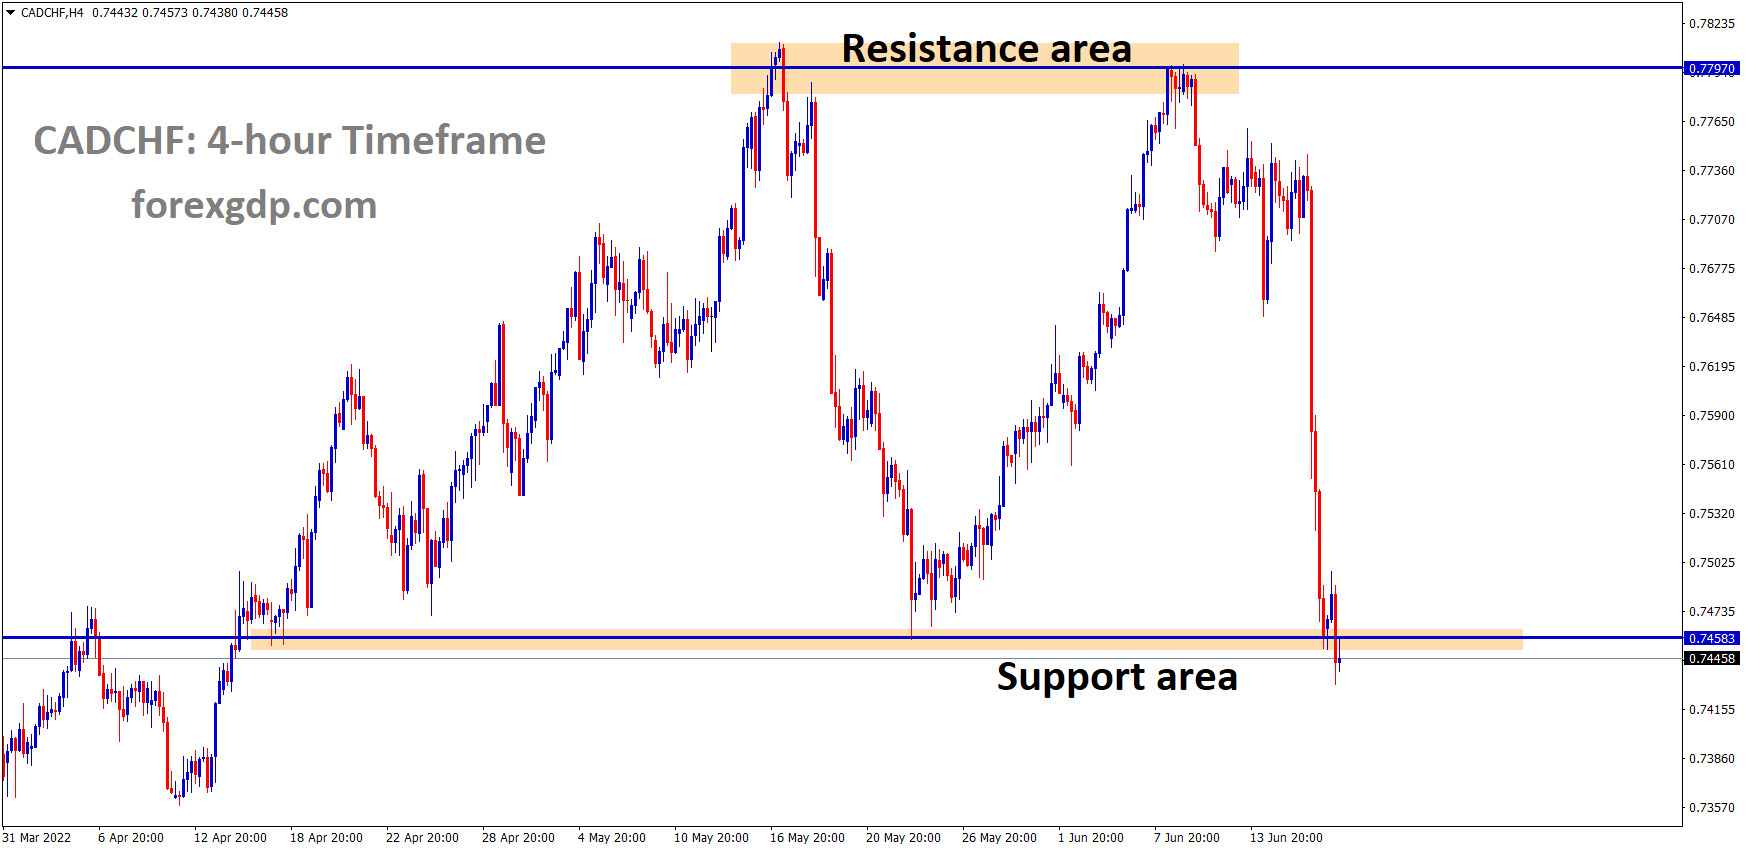 CADCHF is moving in the Box Pattern and the Market has reached the horizontal support area of the pattern